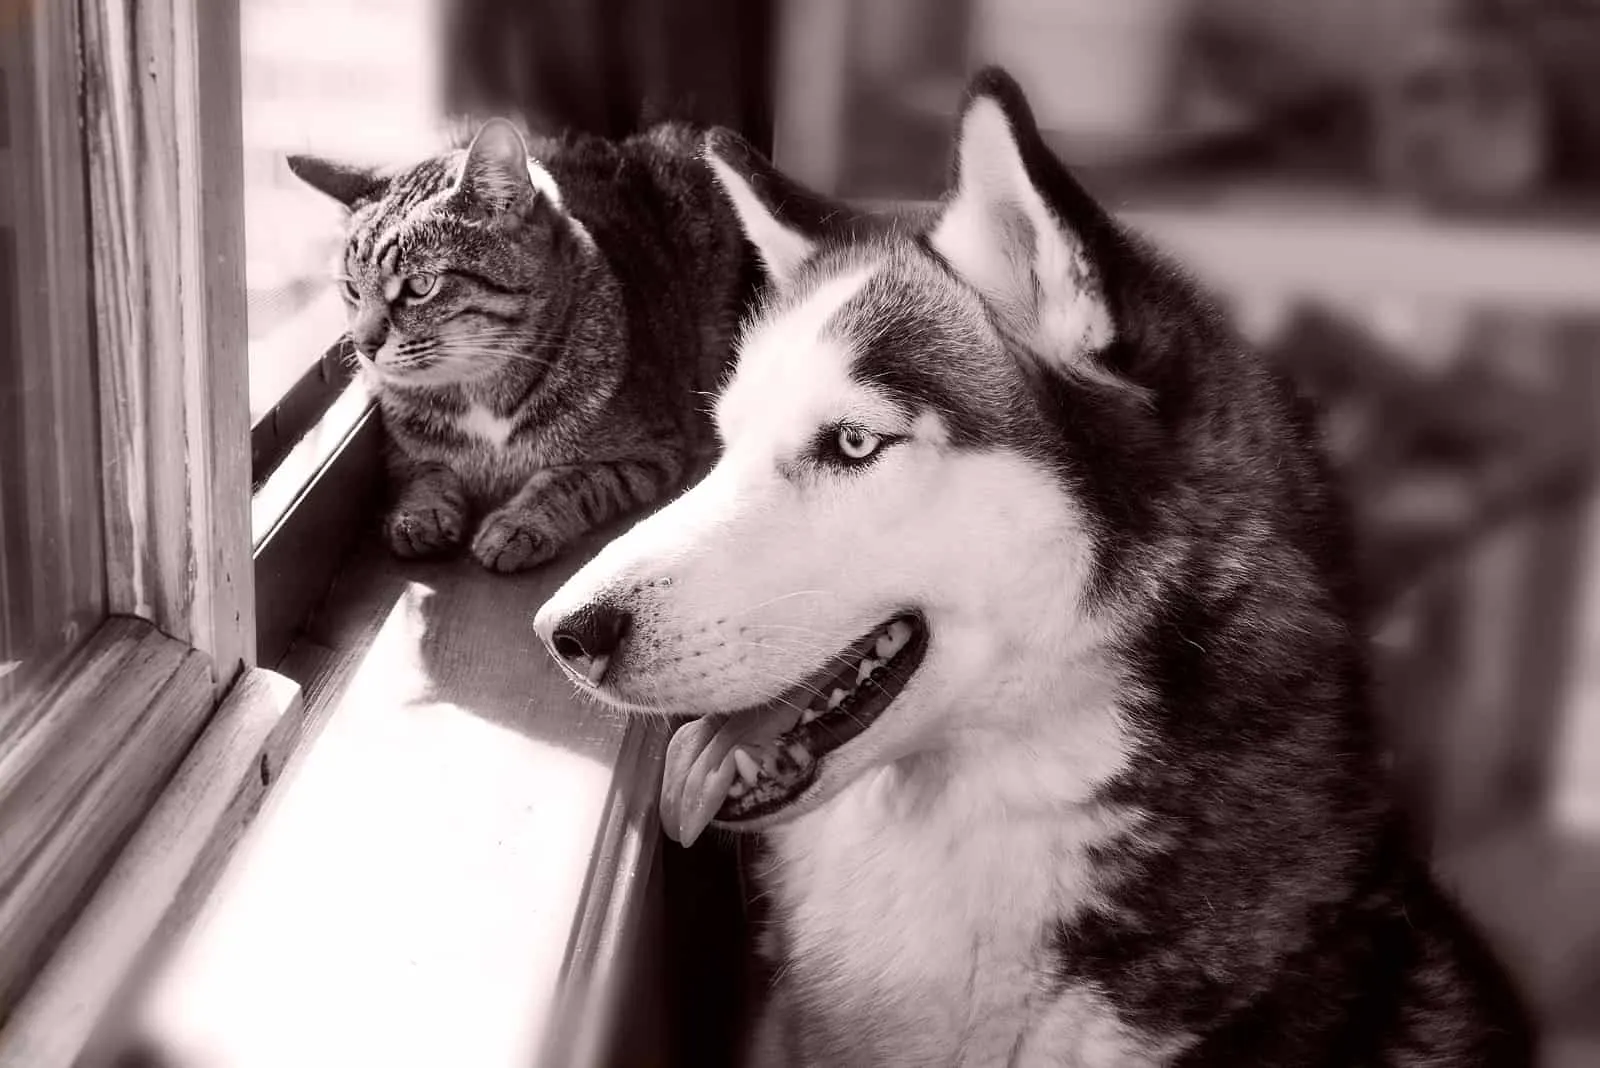 husky and cat looking out of window